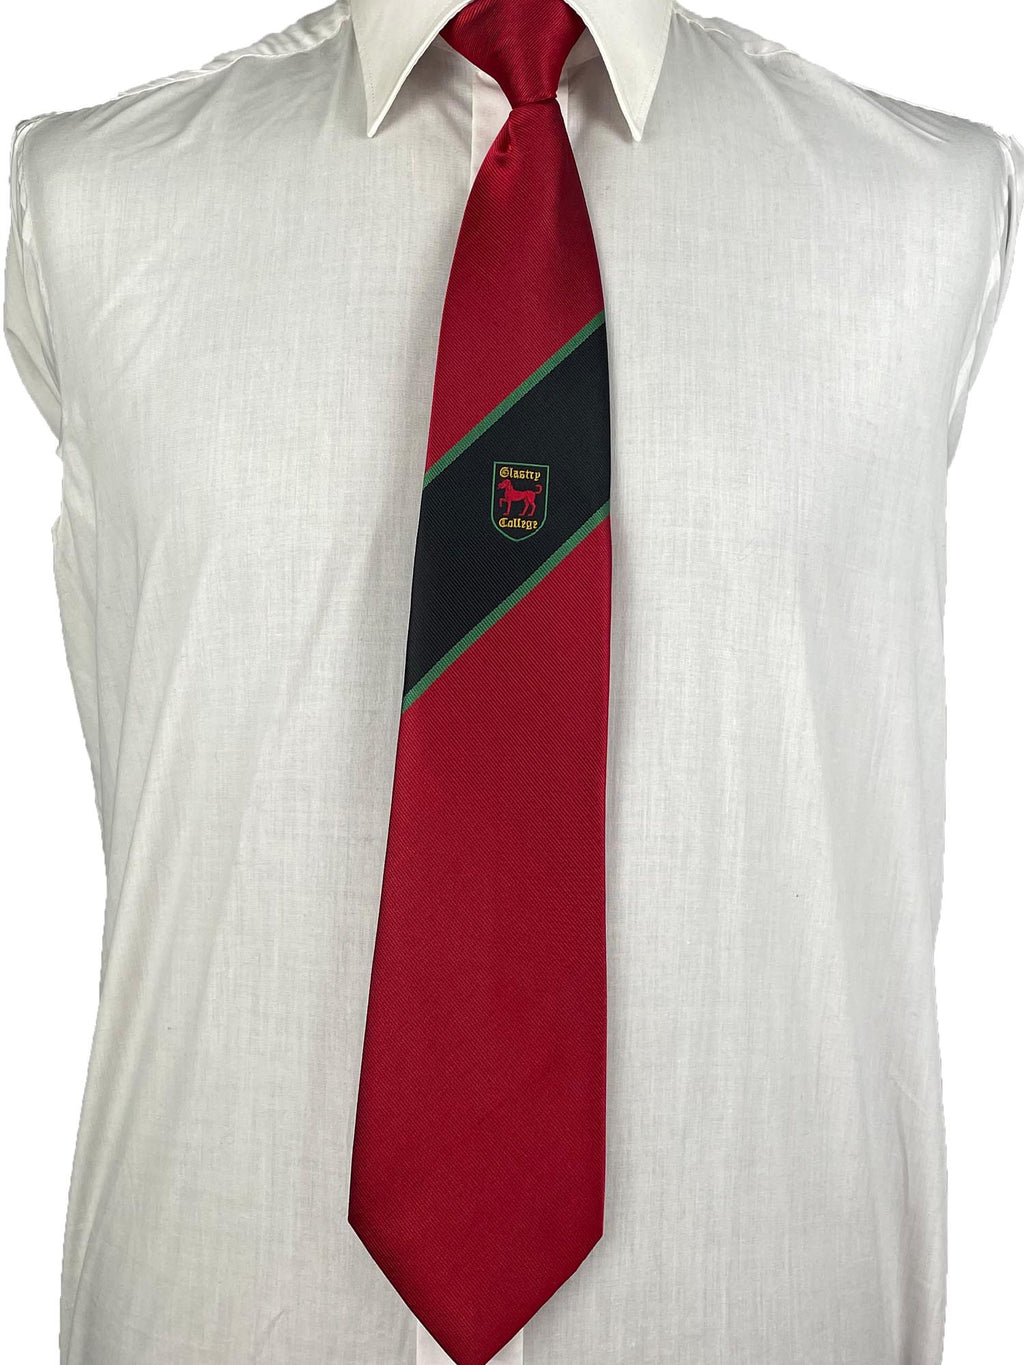 glastry-college-tie-6th-form